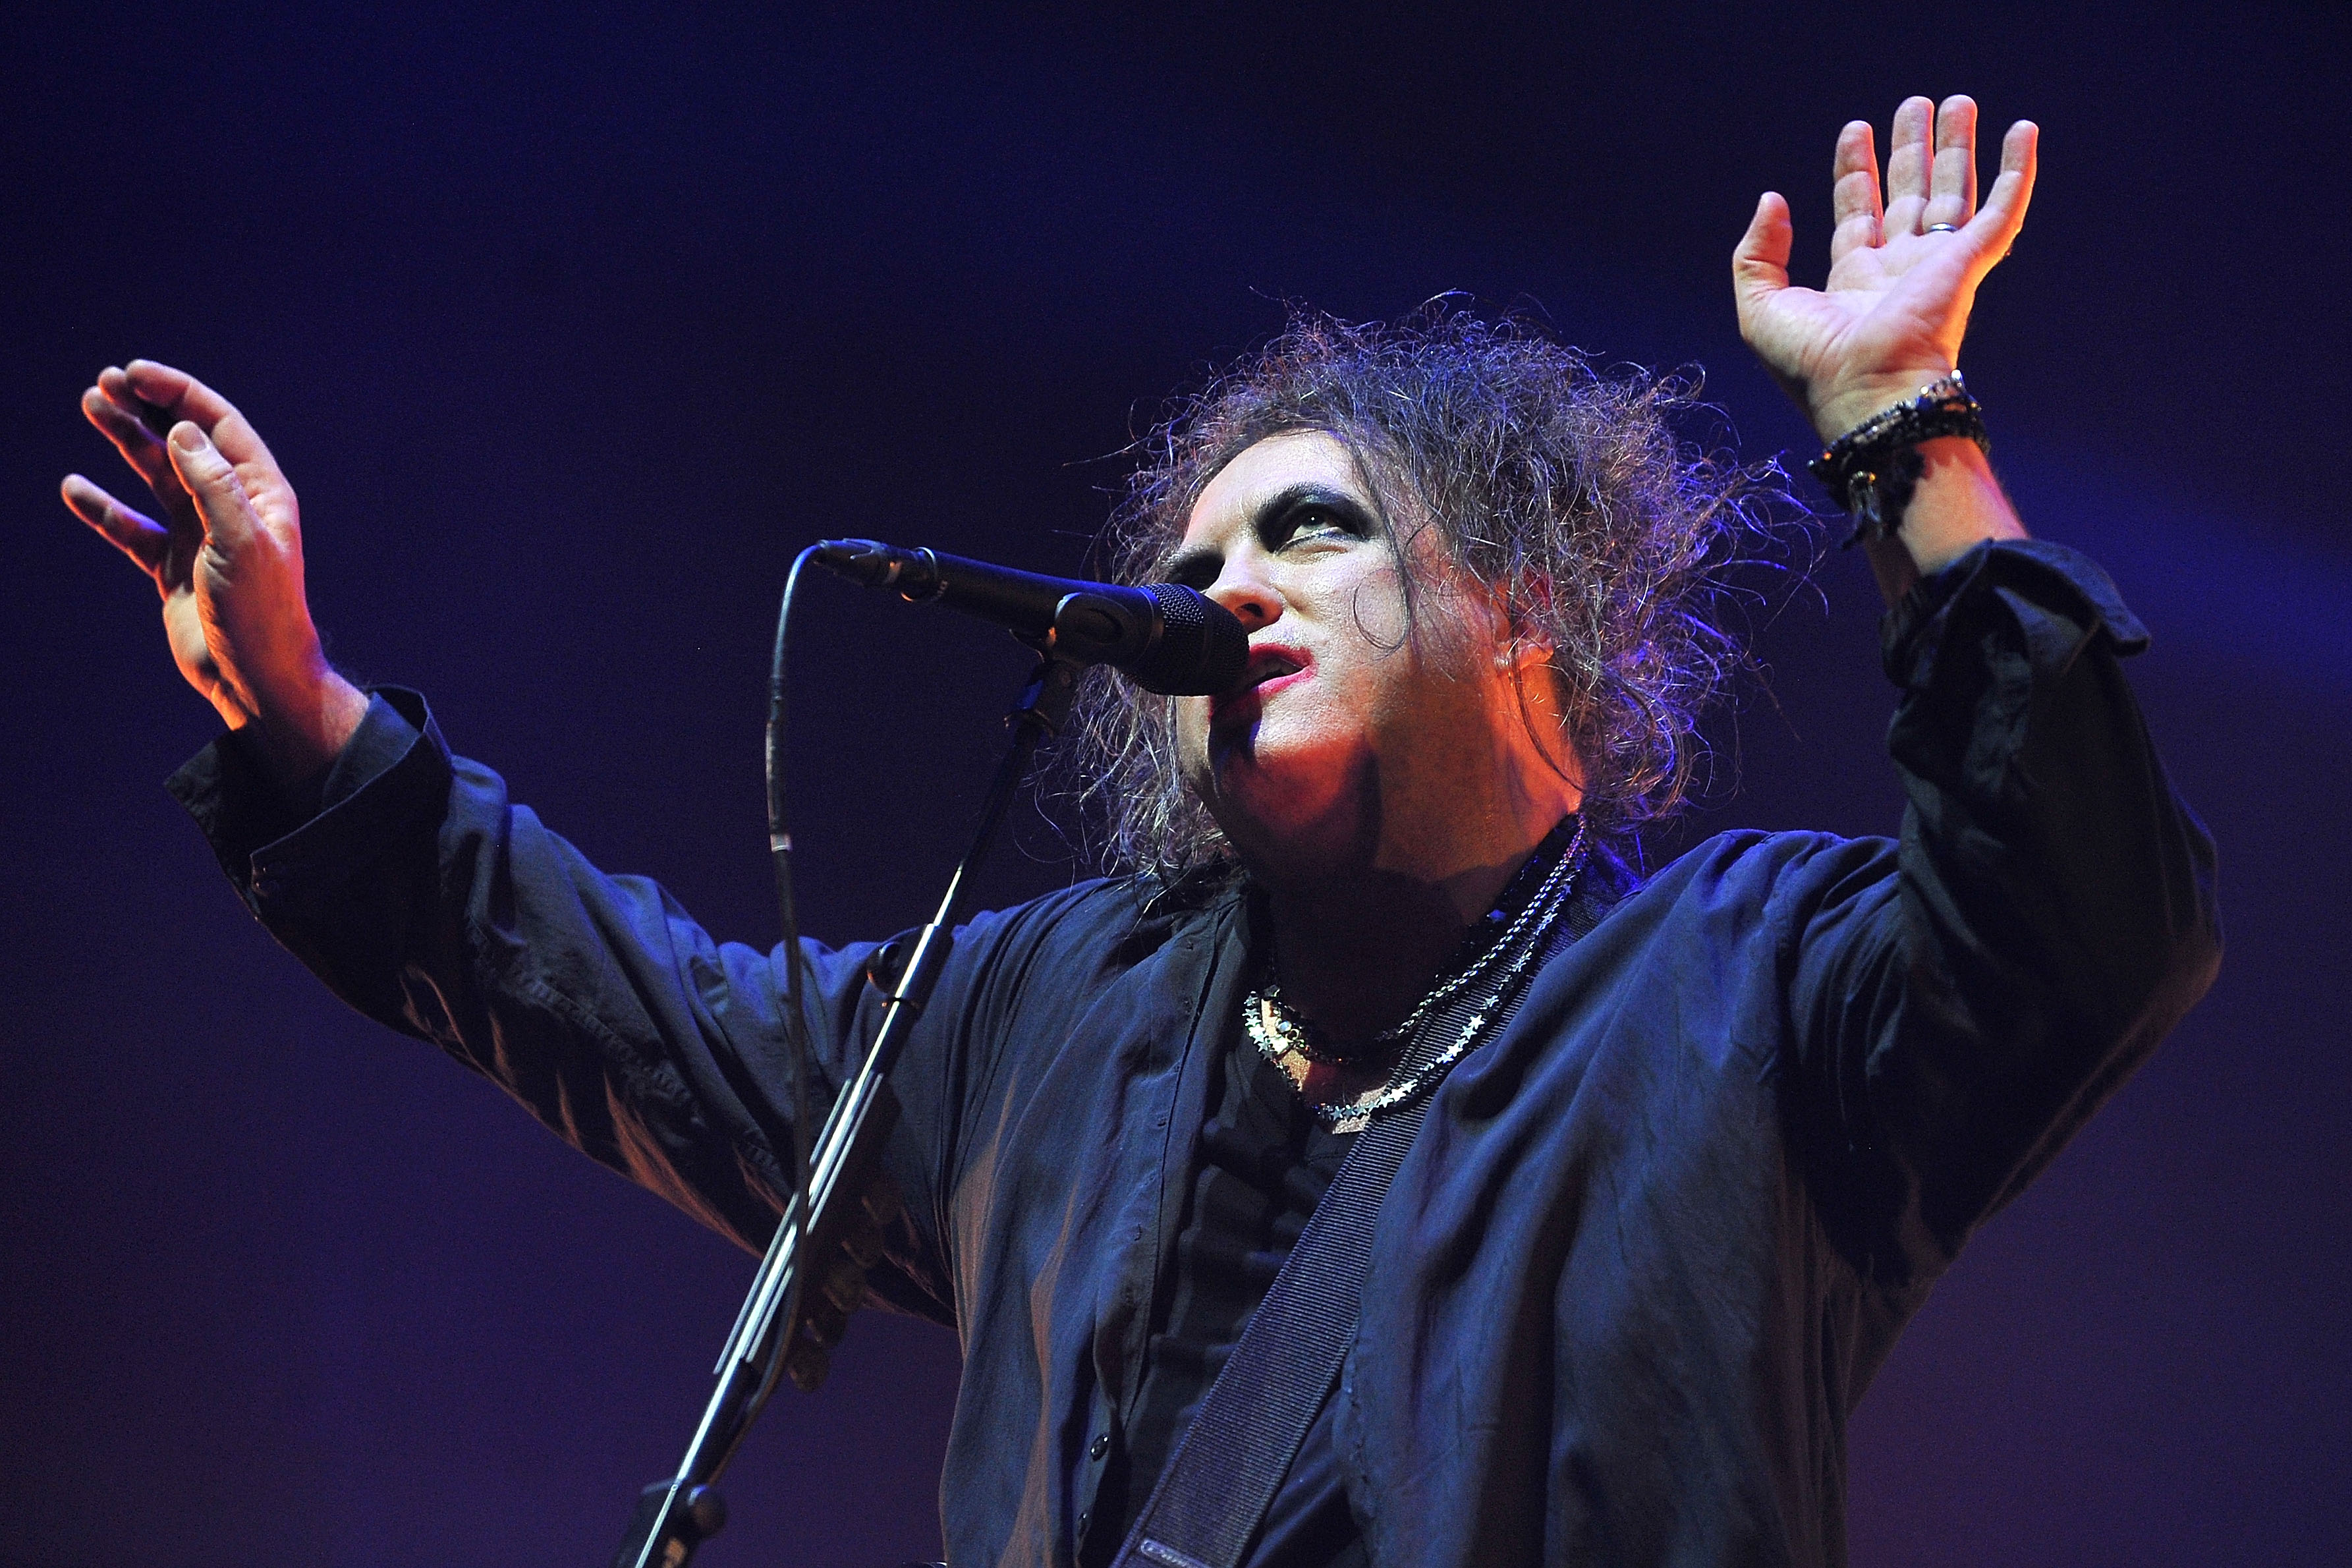 Robert Smith of The Cure performs live on stage at Wembley Arena on December 1, 2016, in London, England. | Source: Getty Images